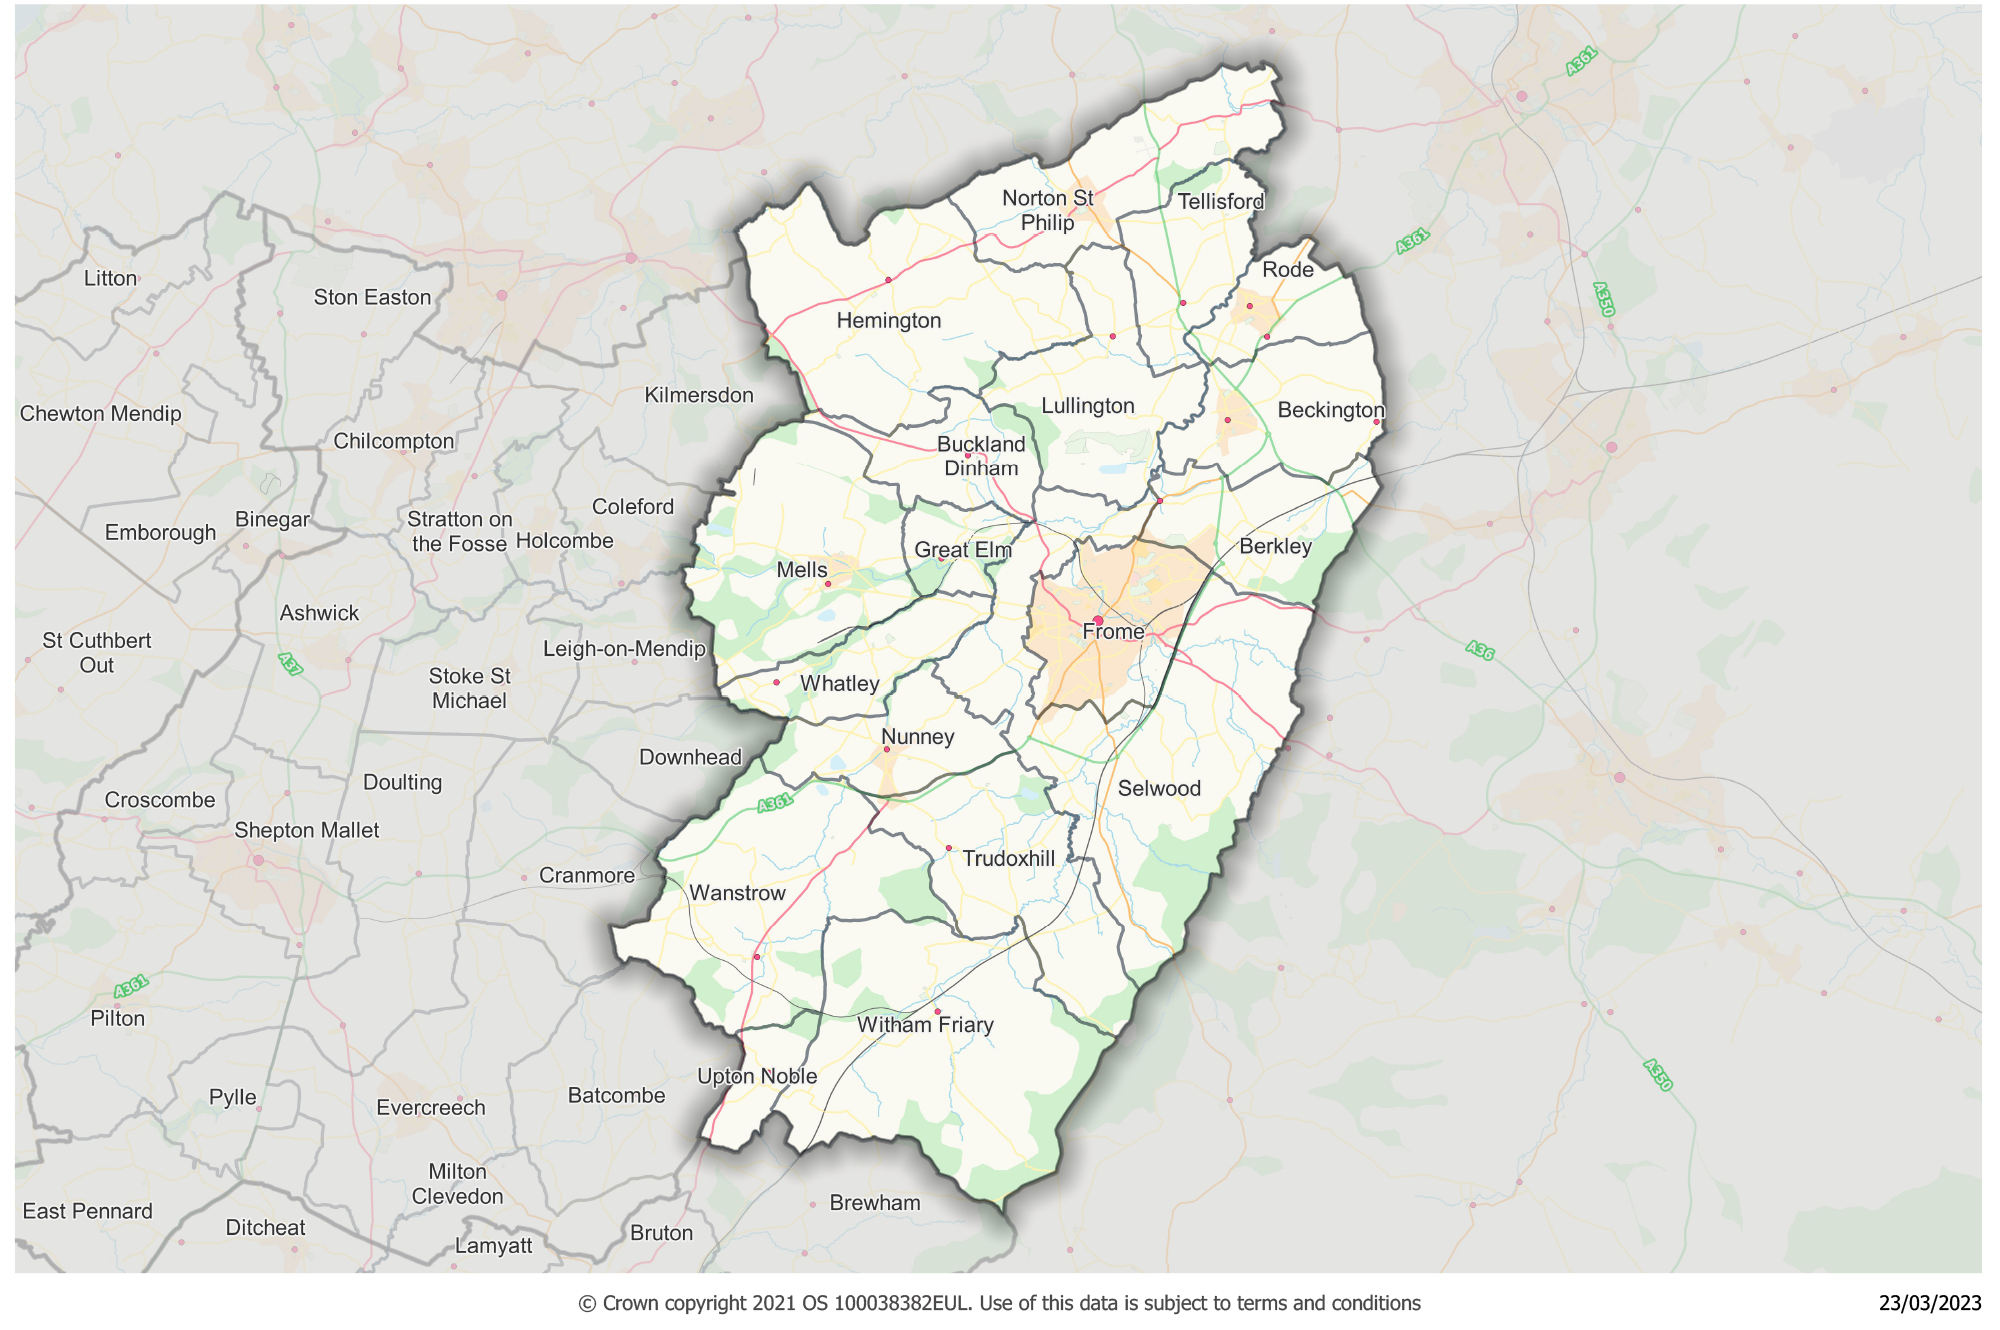 Frome area local community network pilot map